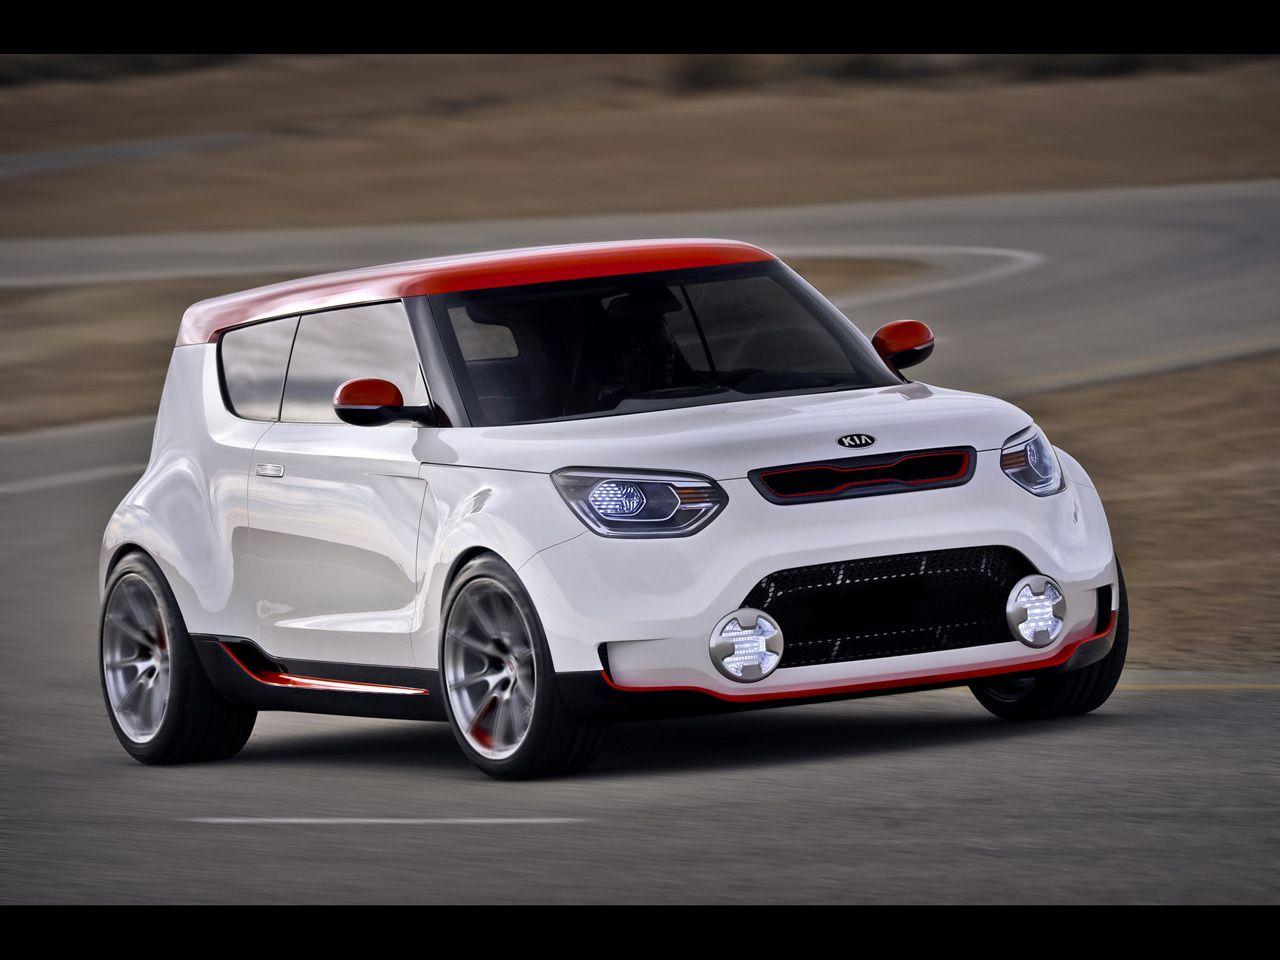 New Kia Soul for 2013 Frankfurt Motor Show (not the Soul). Oh My